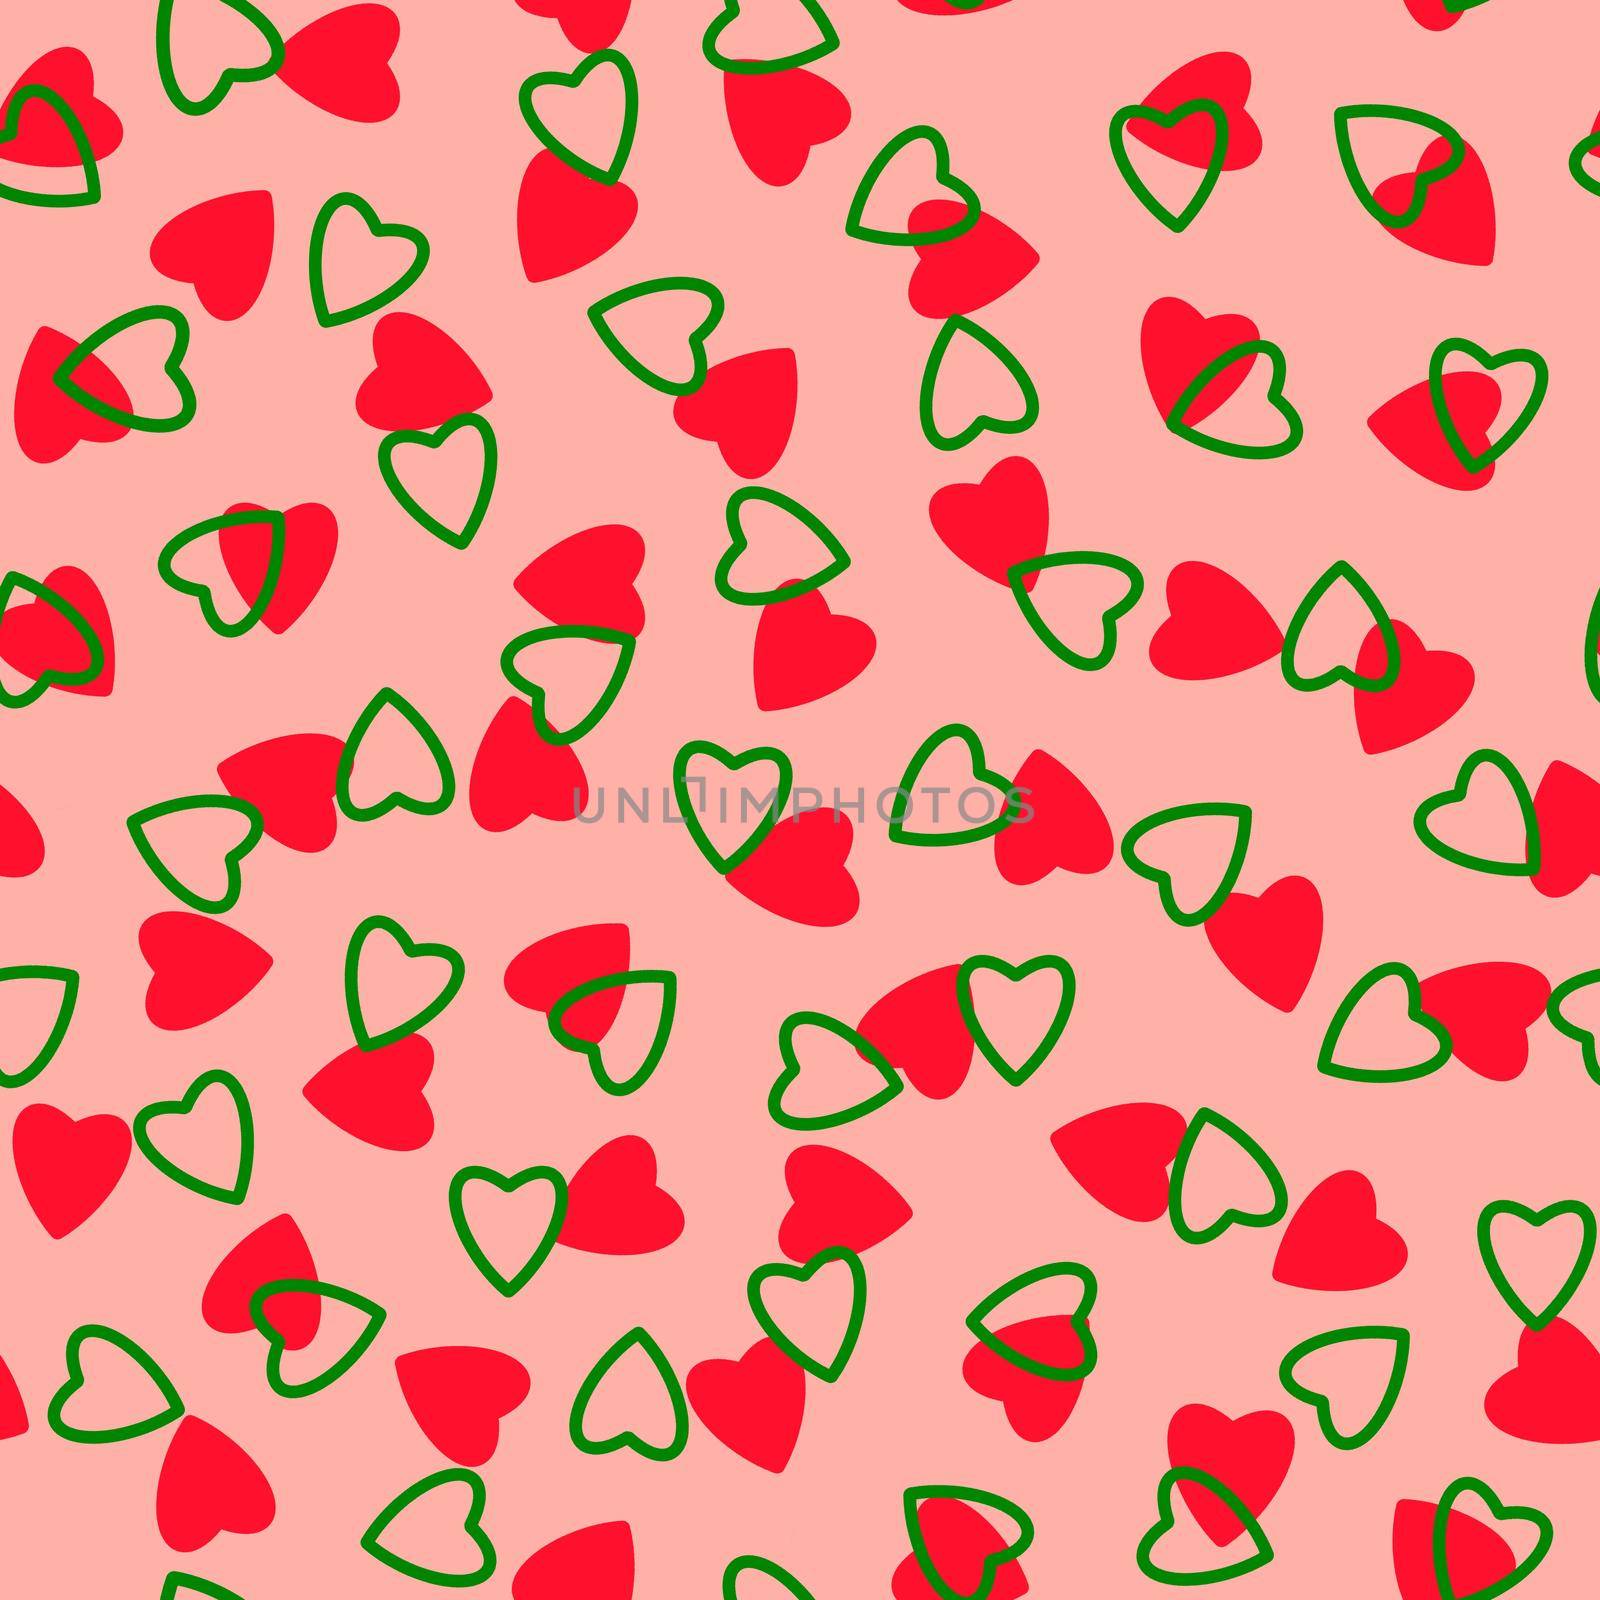 Simple hearts seamless pattern,endless chaotic texture made of tiny heart silhouettes.Valentines,mothers day background.Great for Easter,wedding,scrapbook,gift wrapping paper,textiles.Red,green,pink by Angelsmoon